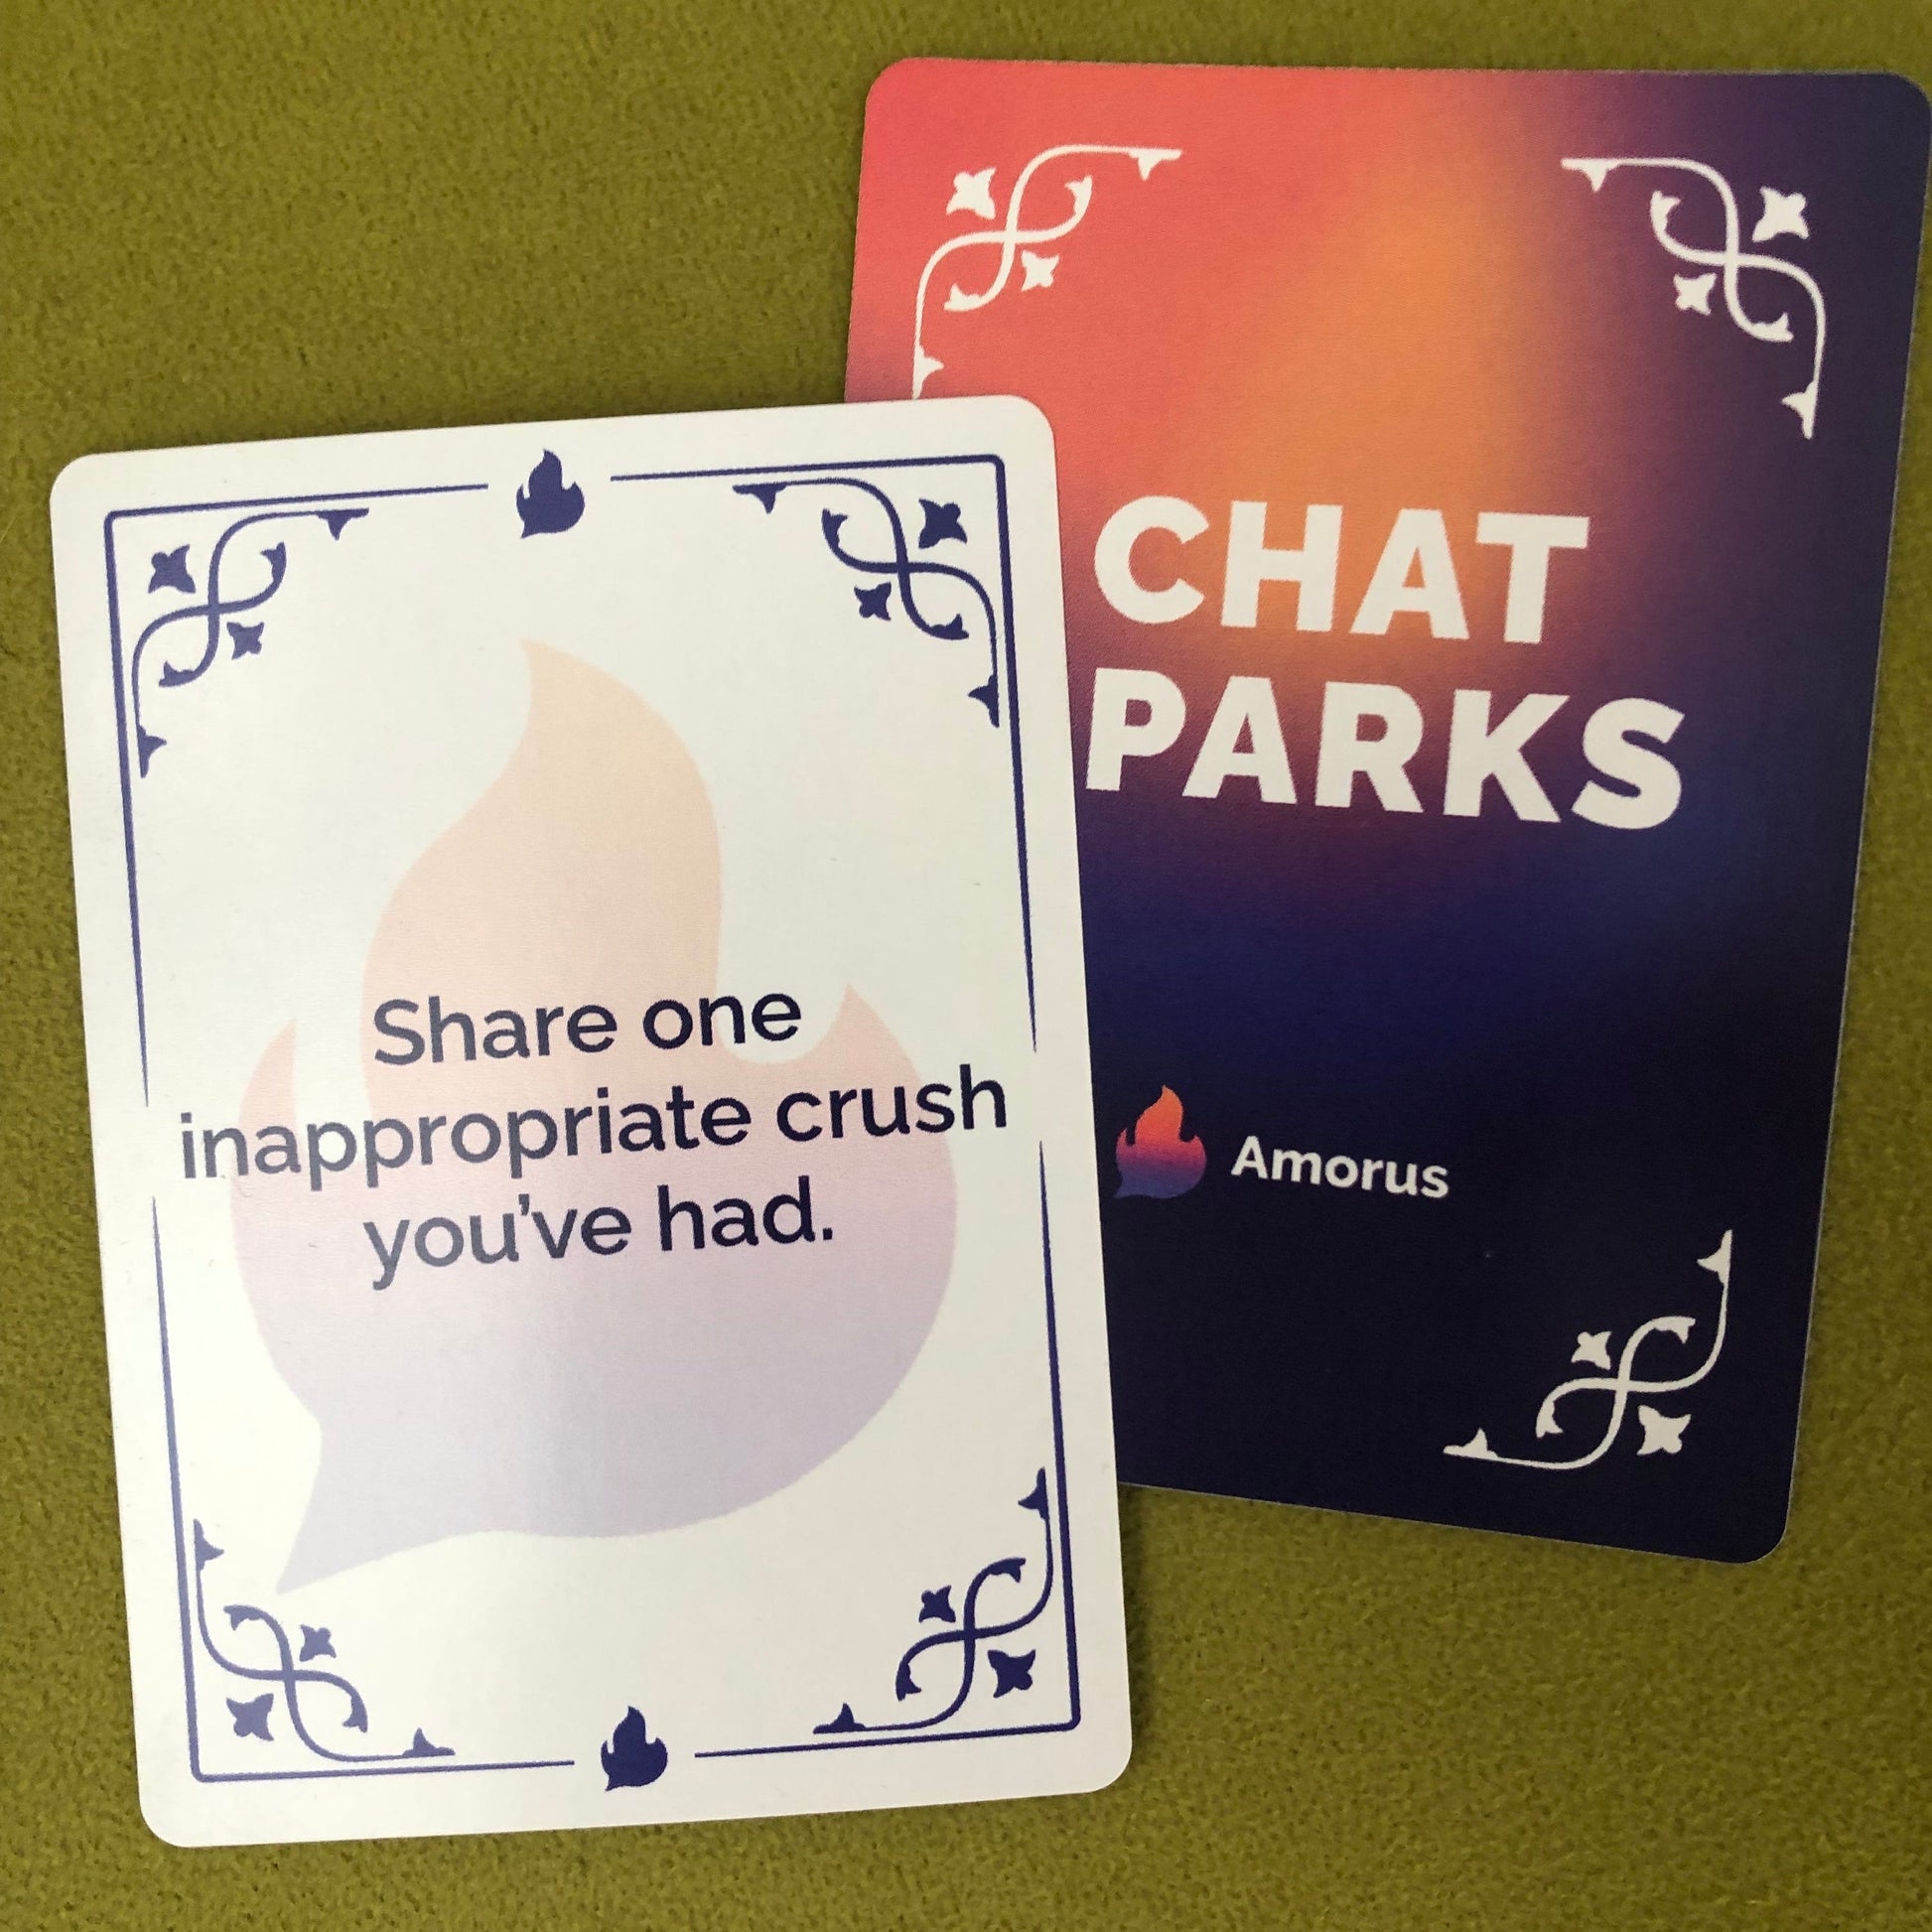 Image of Chat Sparks game card on light green felt. Card reads "Share one inappropriate crush you've had."